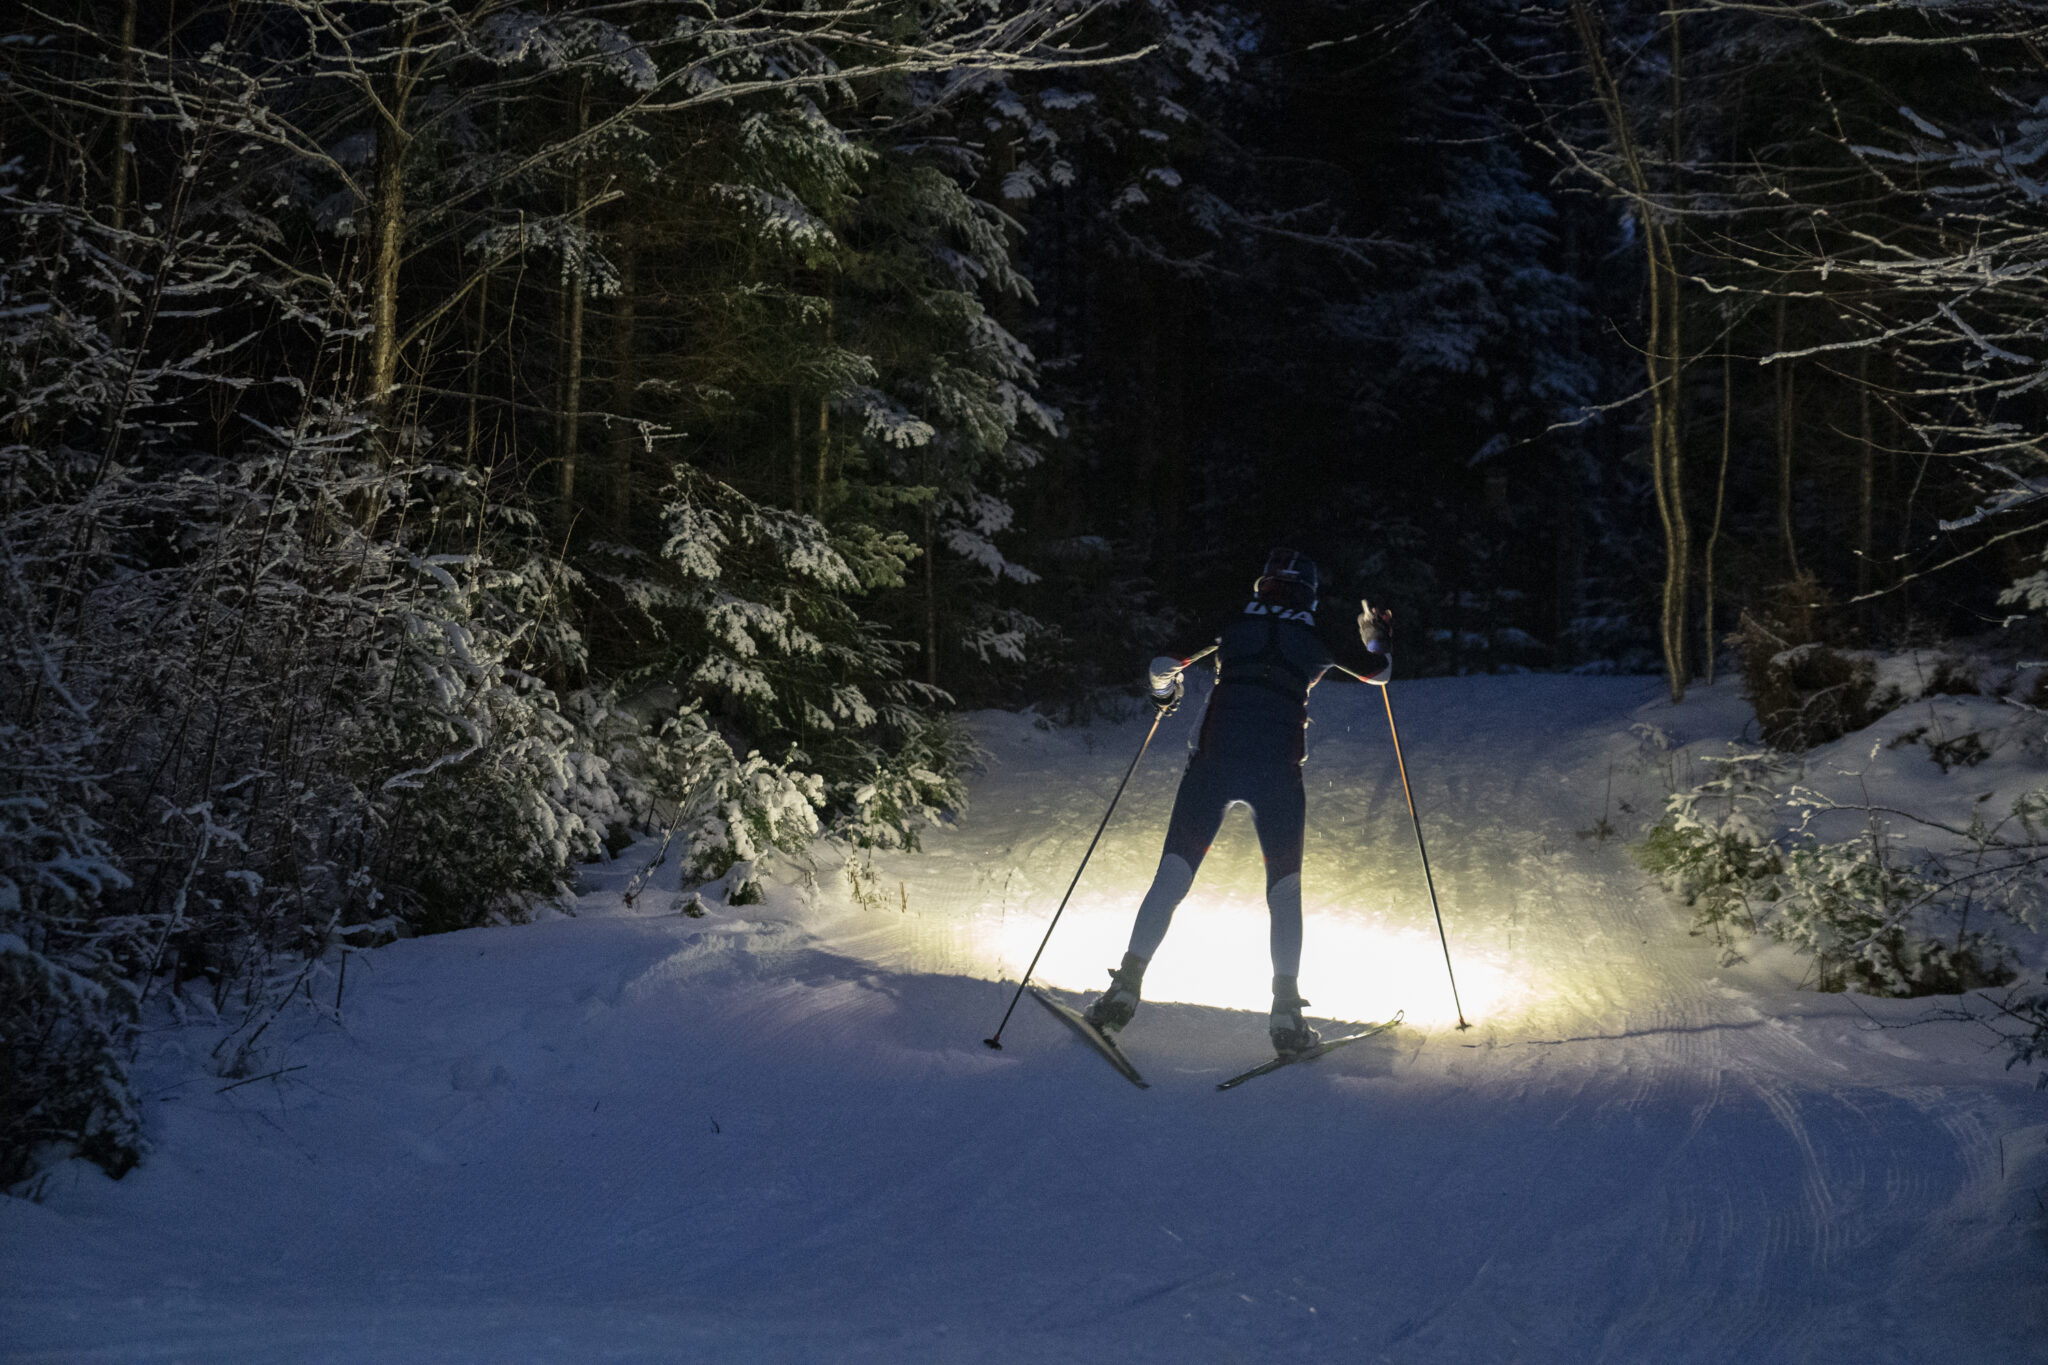 a cross country skier skis at night